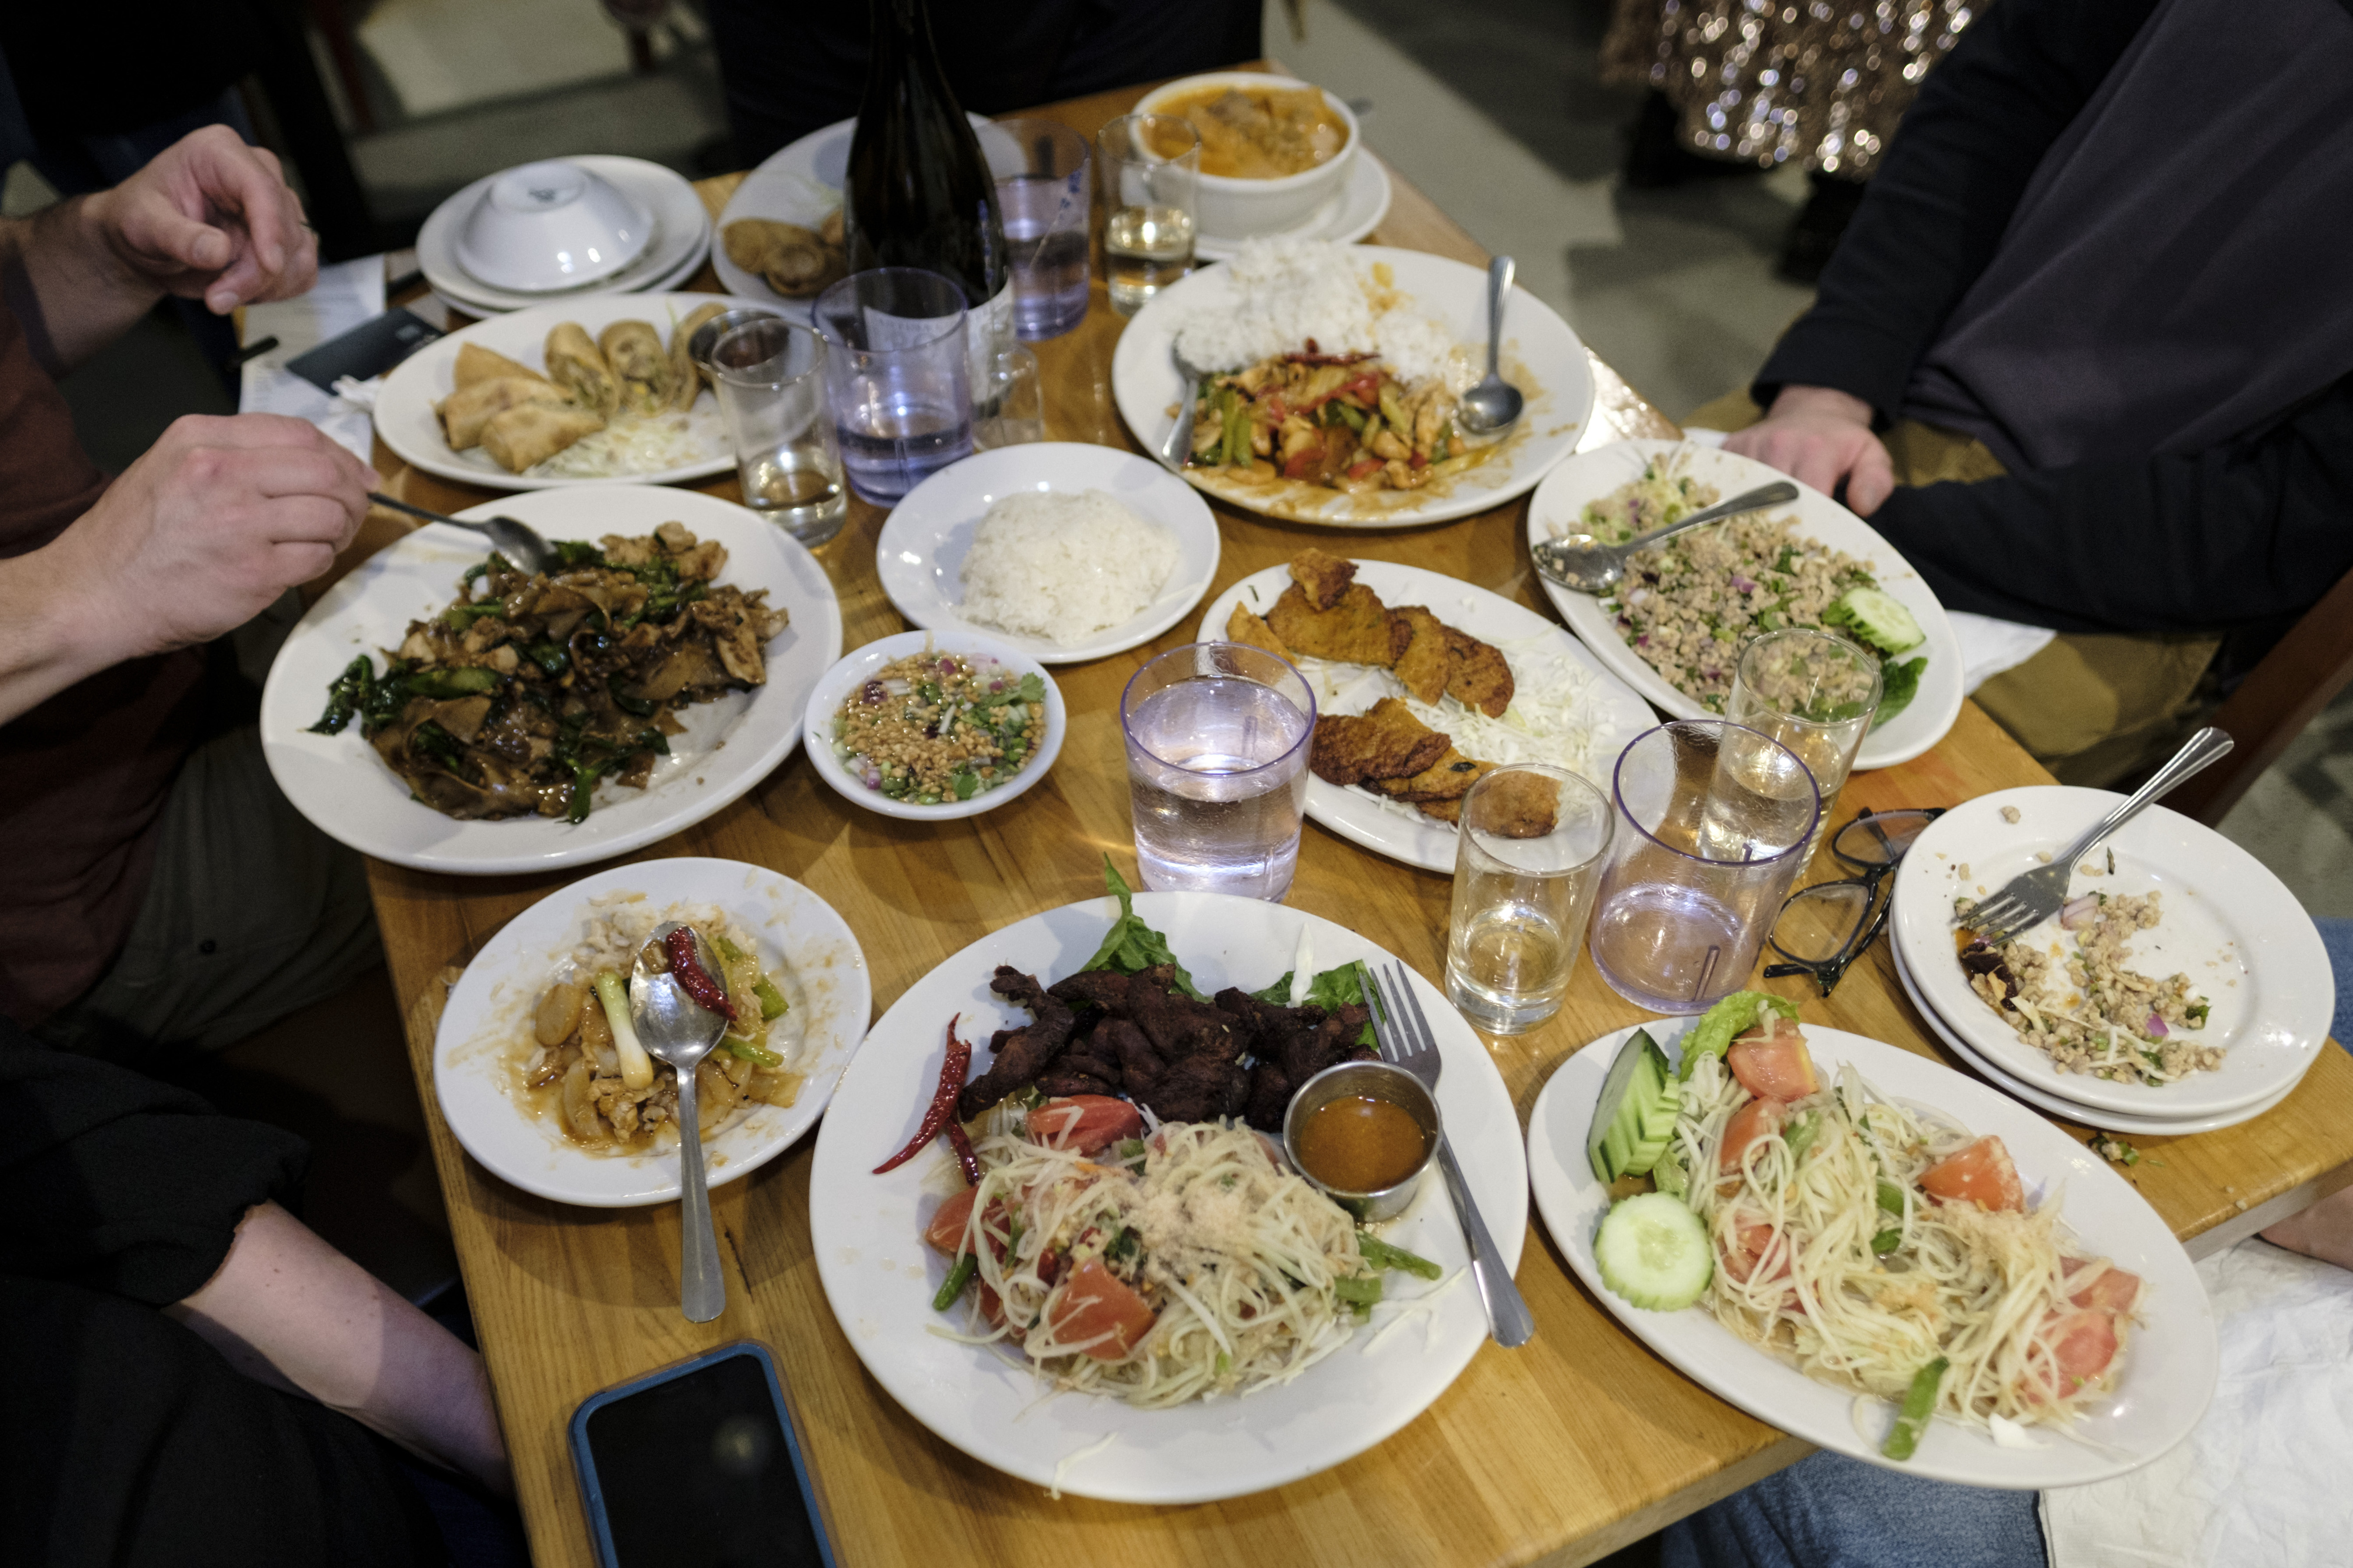 A wood table is set with various Thai dishes on white plates: green papaya salad, fried pork, fish cakes, and other rice and noodle dishes.